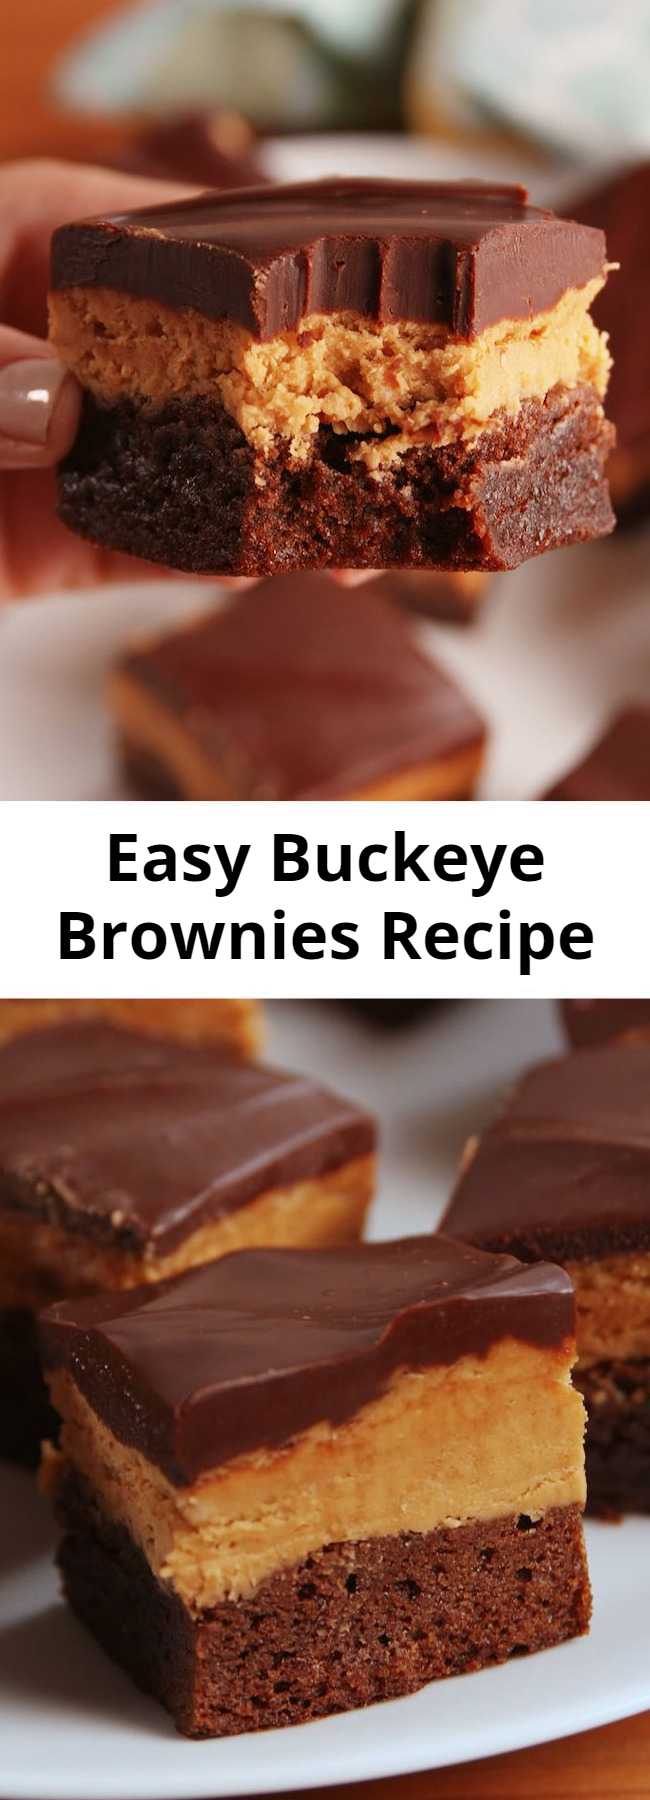 Easy Buckeye Brownies Recipe - It's chocolate and peanut butter. What more could you want?